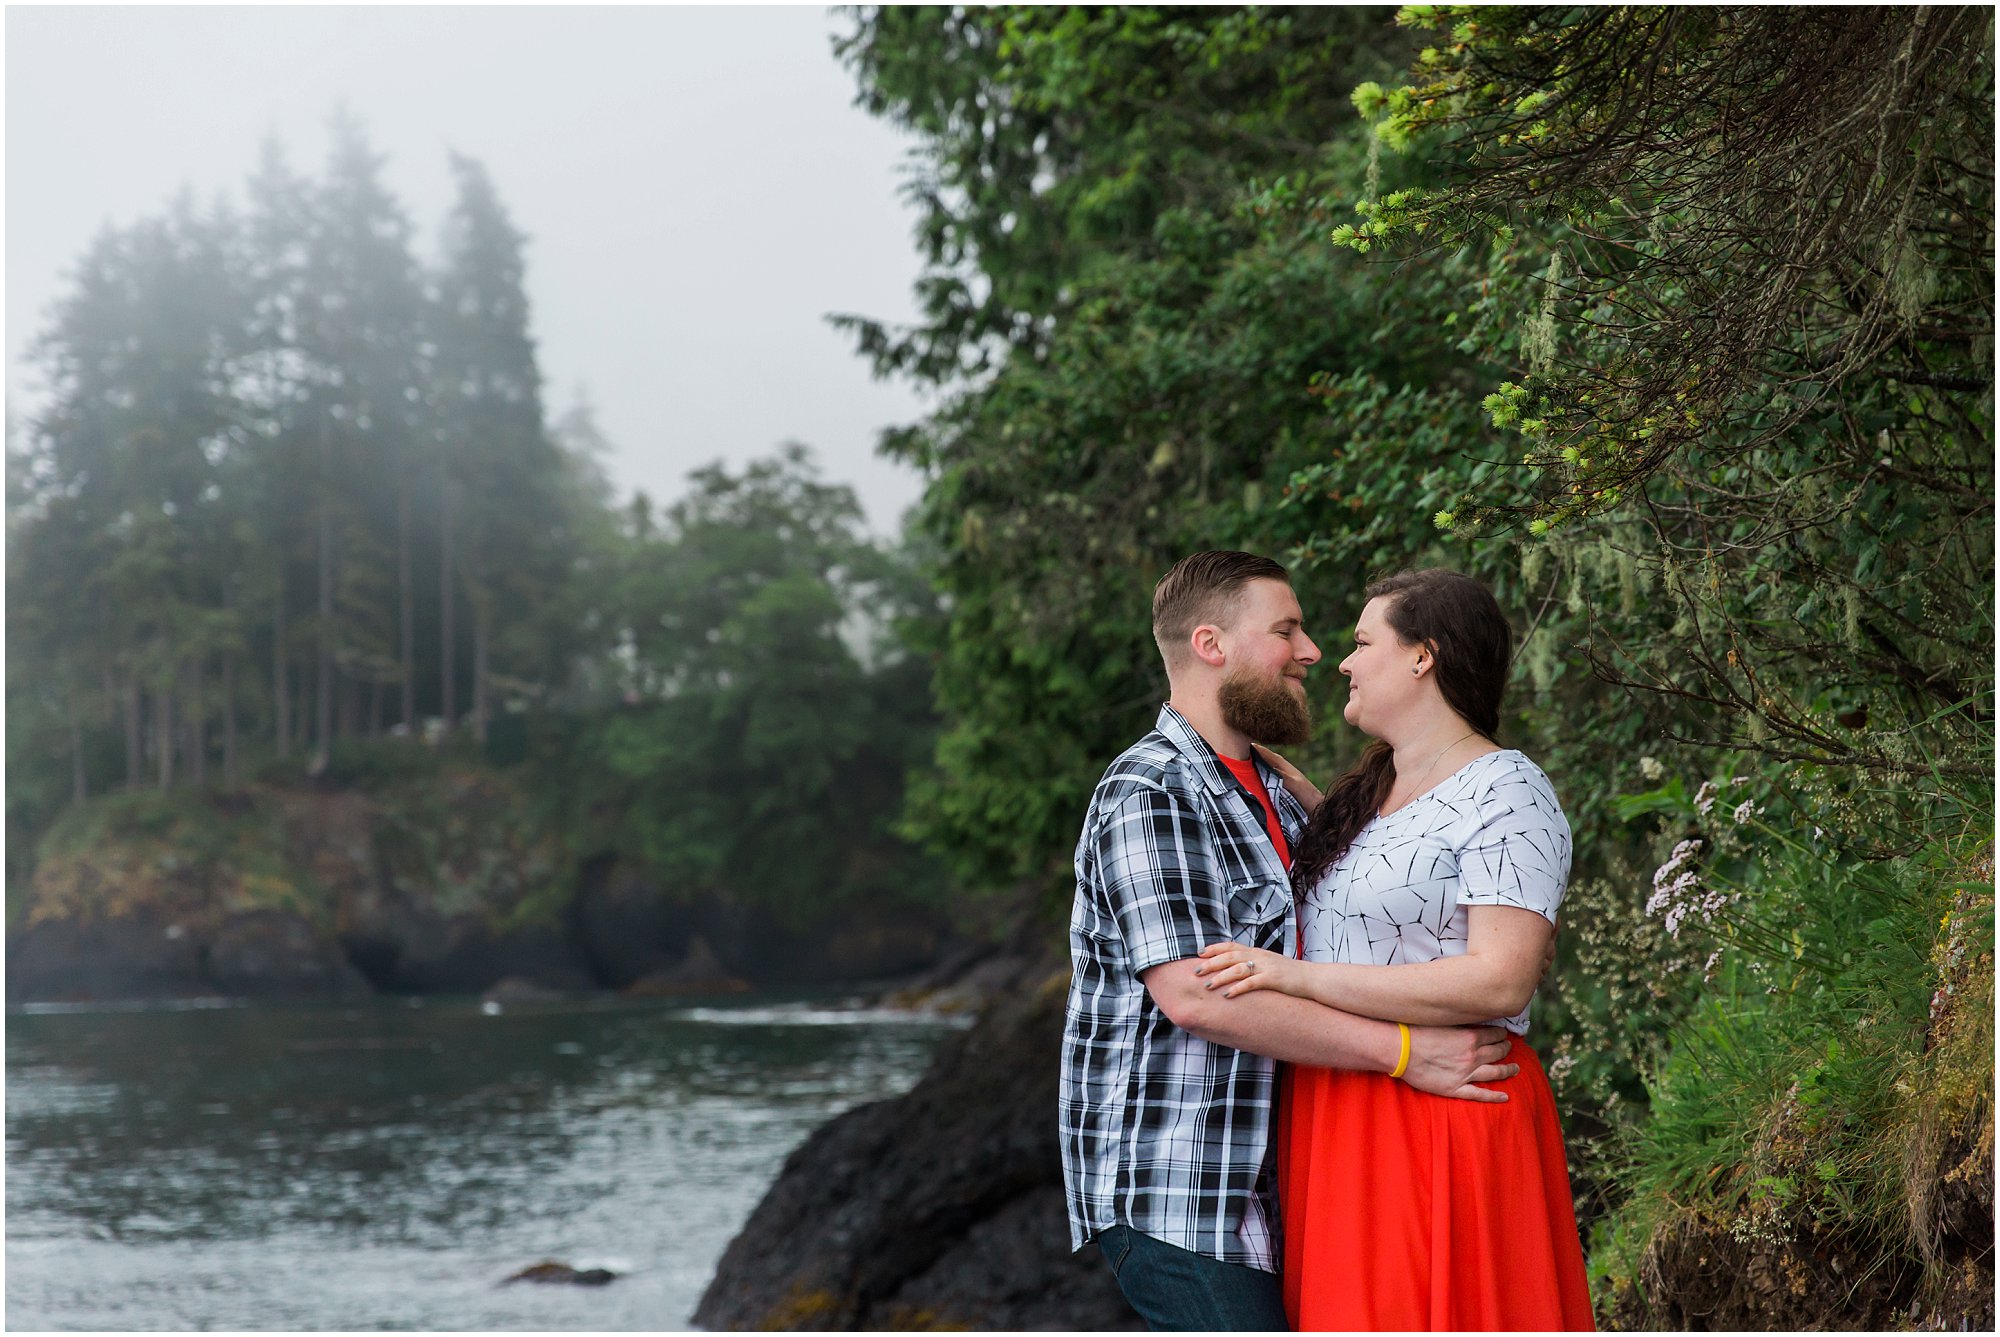 A gorgeous Pacific Northwest coastal engagement photo session at Salt Creek Recreation Area outside of Port Angeles, WA. | Erica Swantek Photography